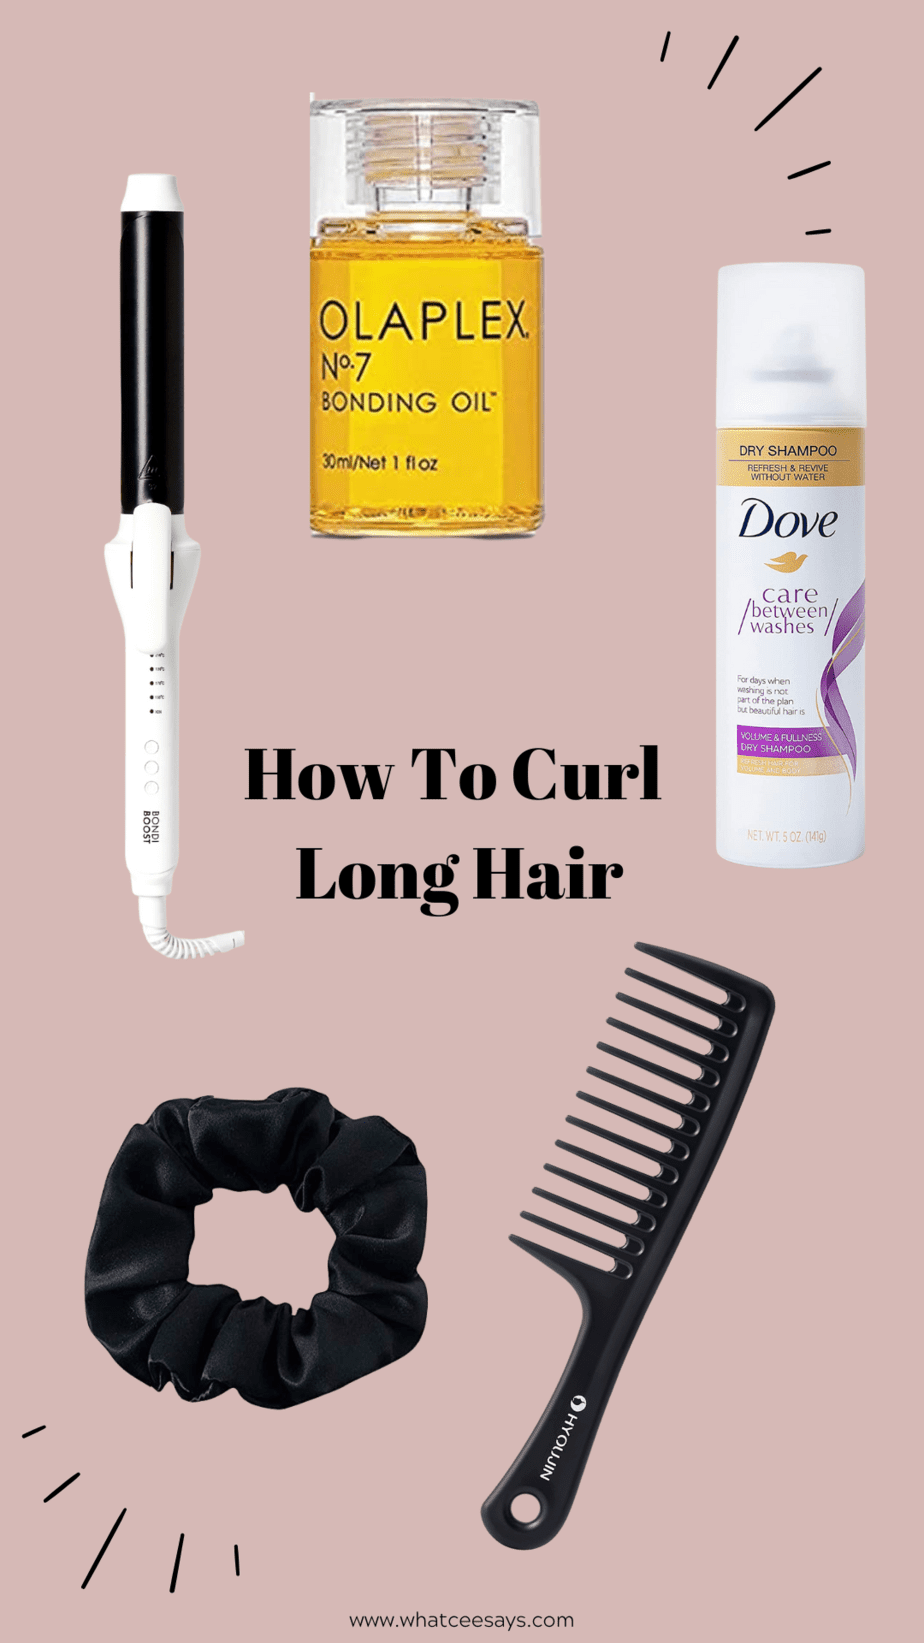 How To Create The Best Loose Curls on Long Thick Hair